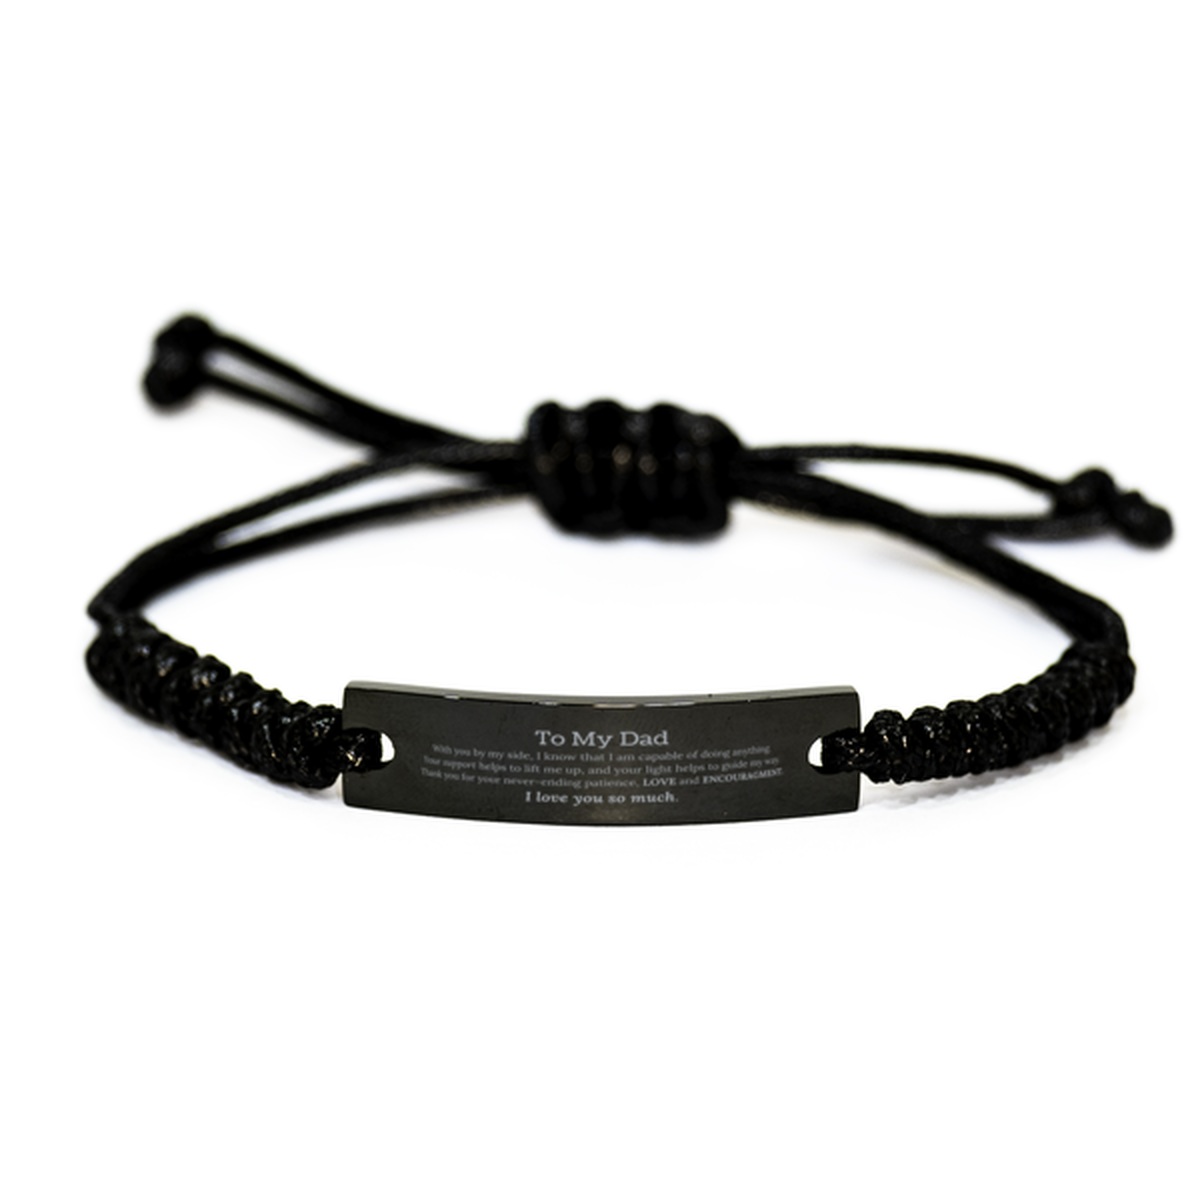 Appreciation Dad Black Rope Bracelet Gifts, To My Dad Birthday Christmas Wedding Keepsake Gifts for Dad With you by my side, I know that I am capable of doing anything. I love you so much